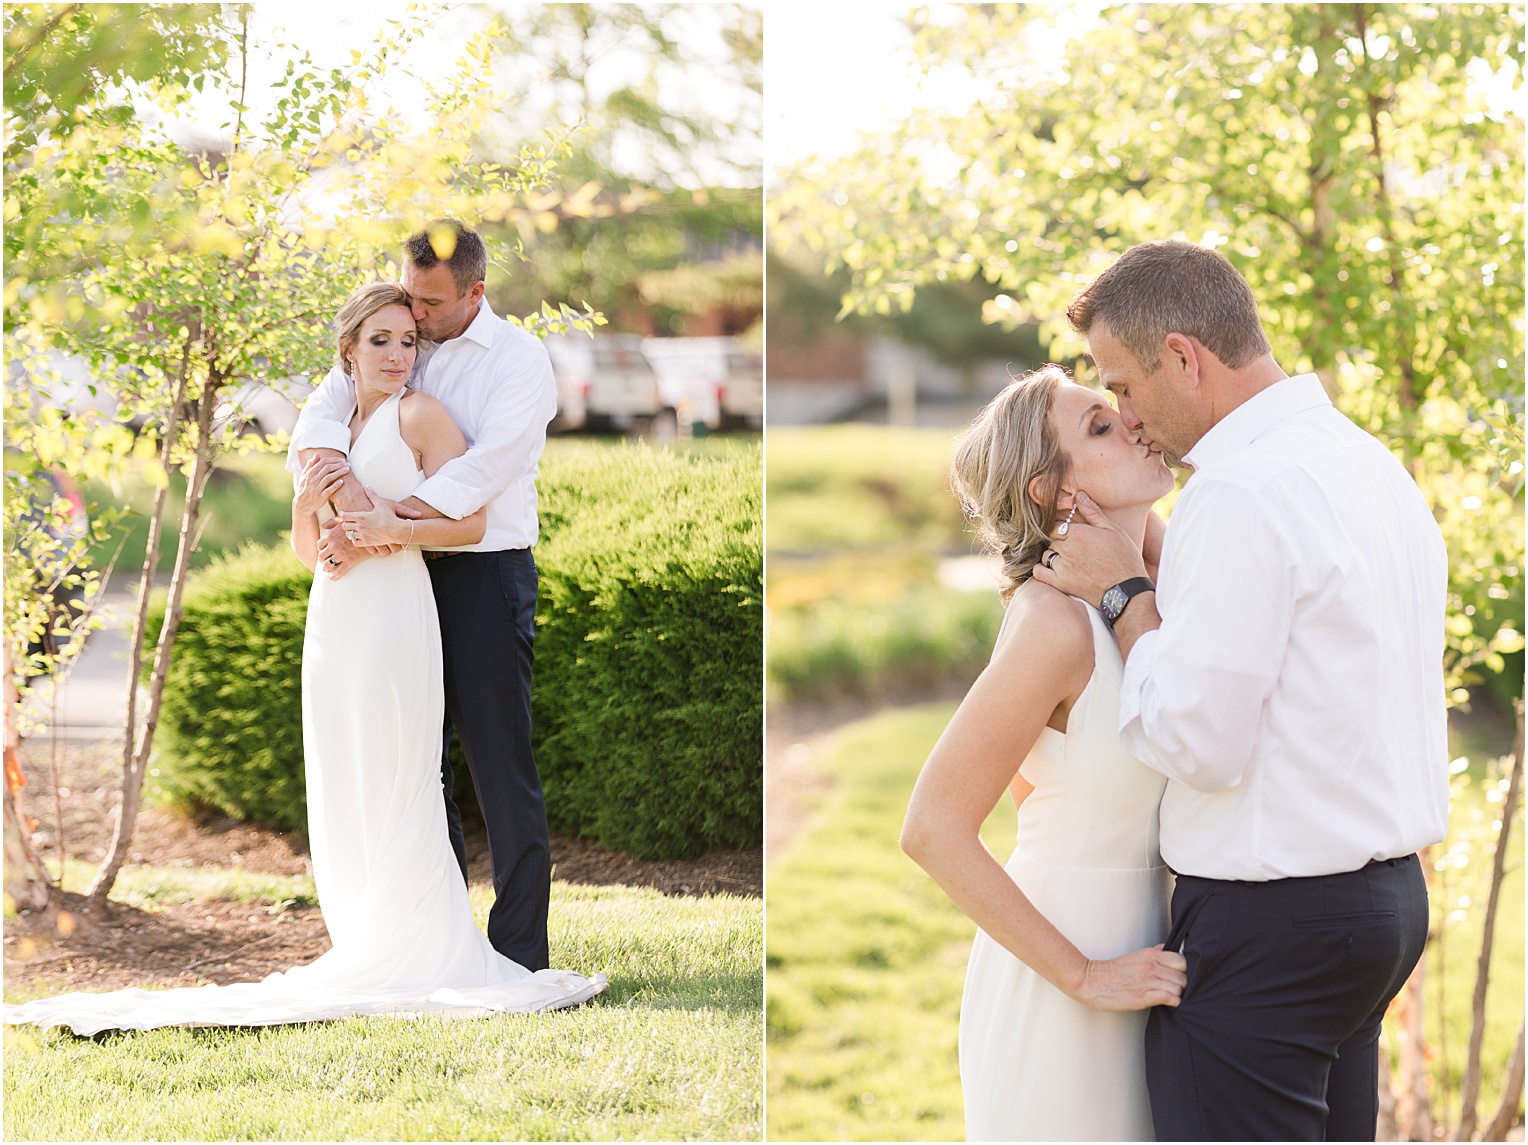 Kansas City Wedding at Union Horse Distilling Co. Danielle + Brandon Neutral White and Navy Spring sunset photo of bride and groom